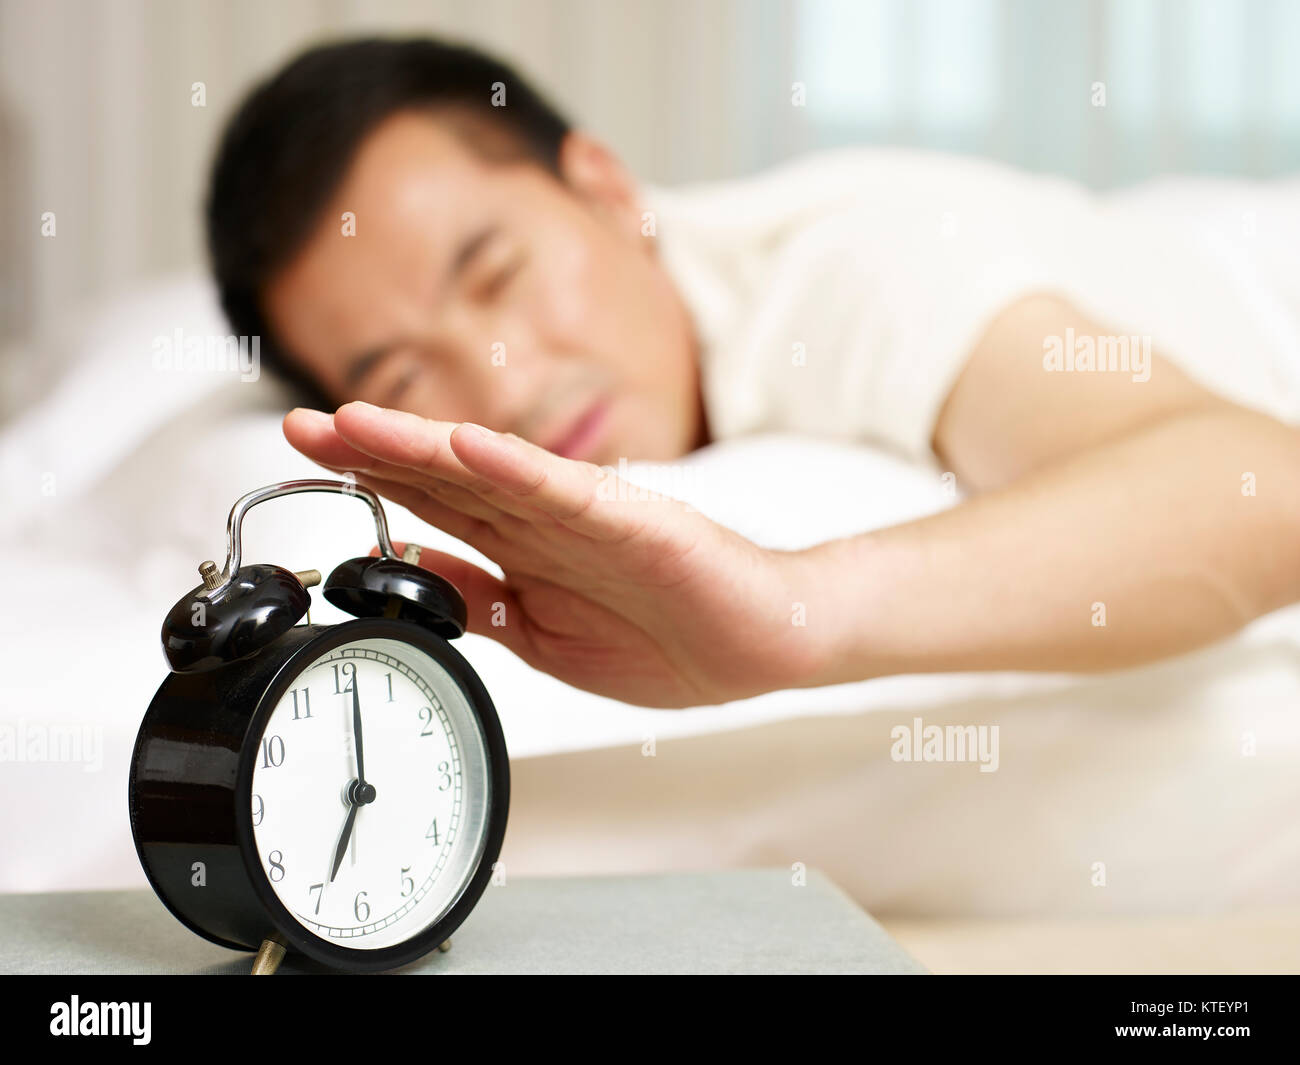 asian man lying in bed trying to stop ringing alarm clock, focus on the clock. Stock Photo